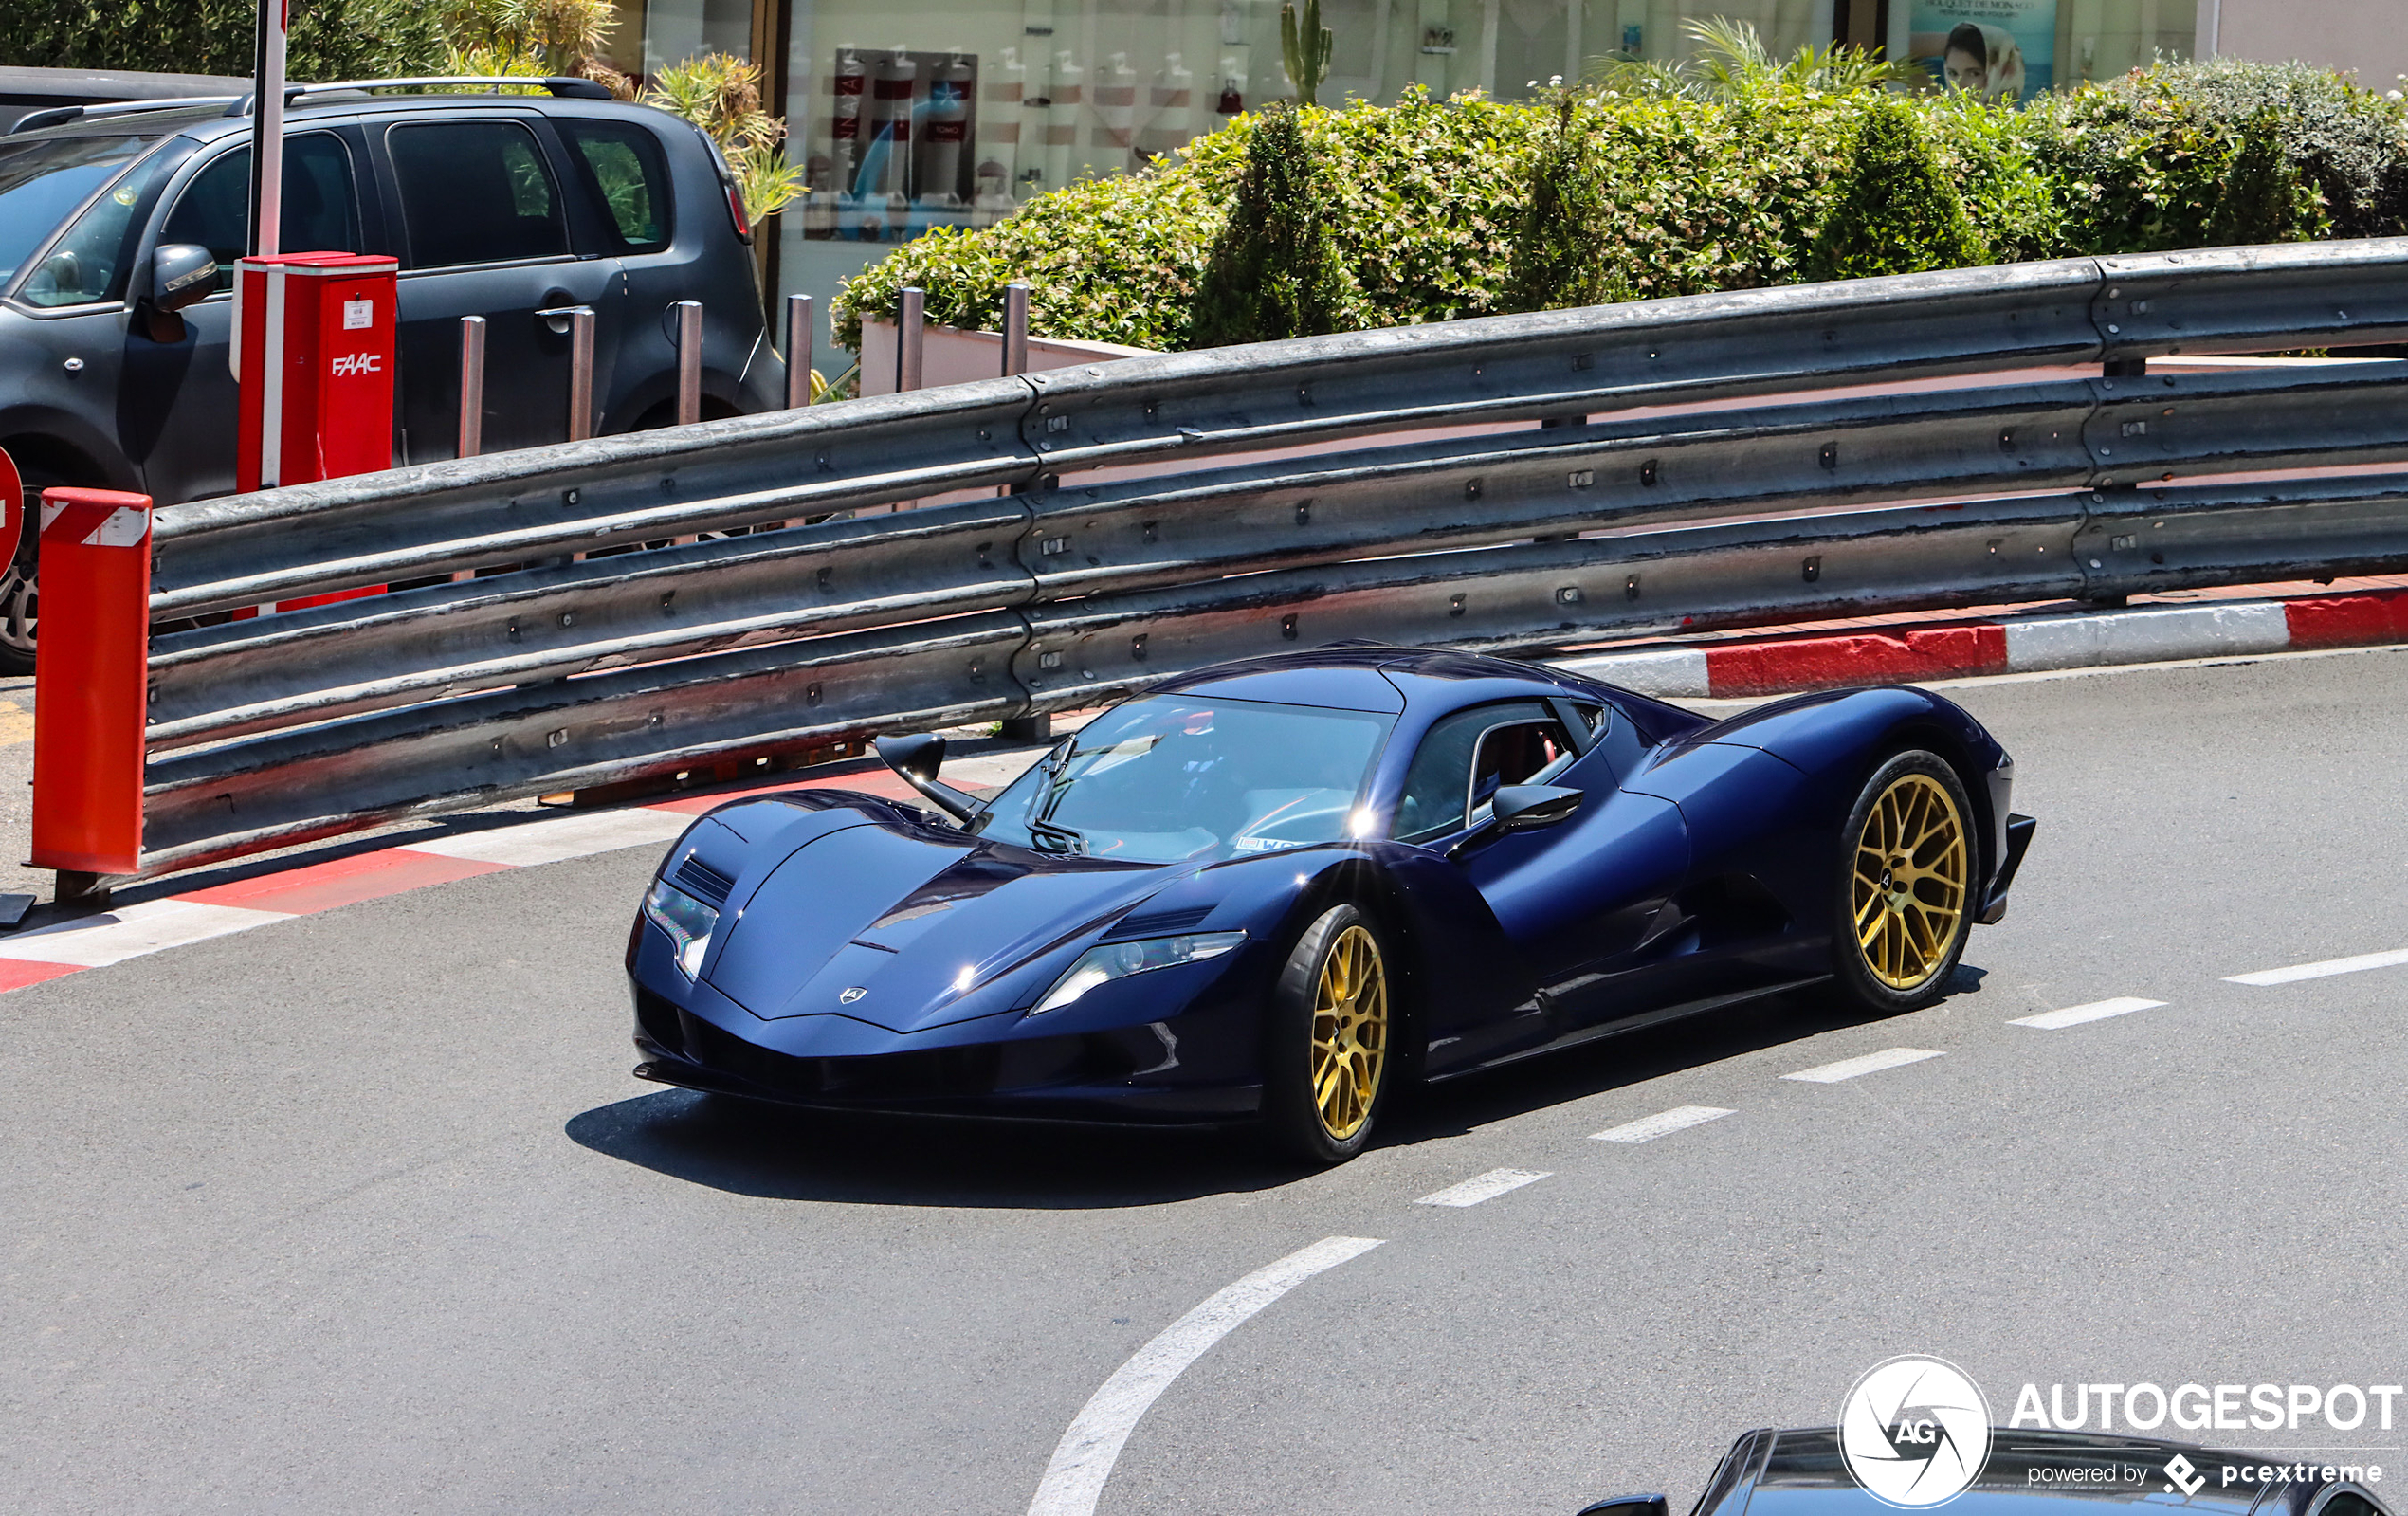 The very first Aspark Owl has been spotted in Monaco